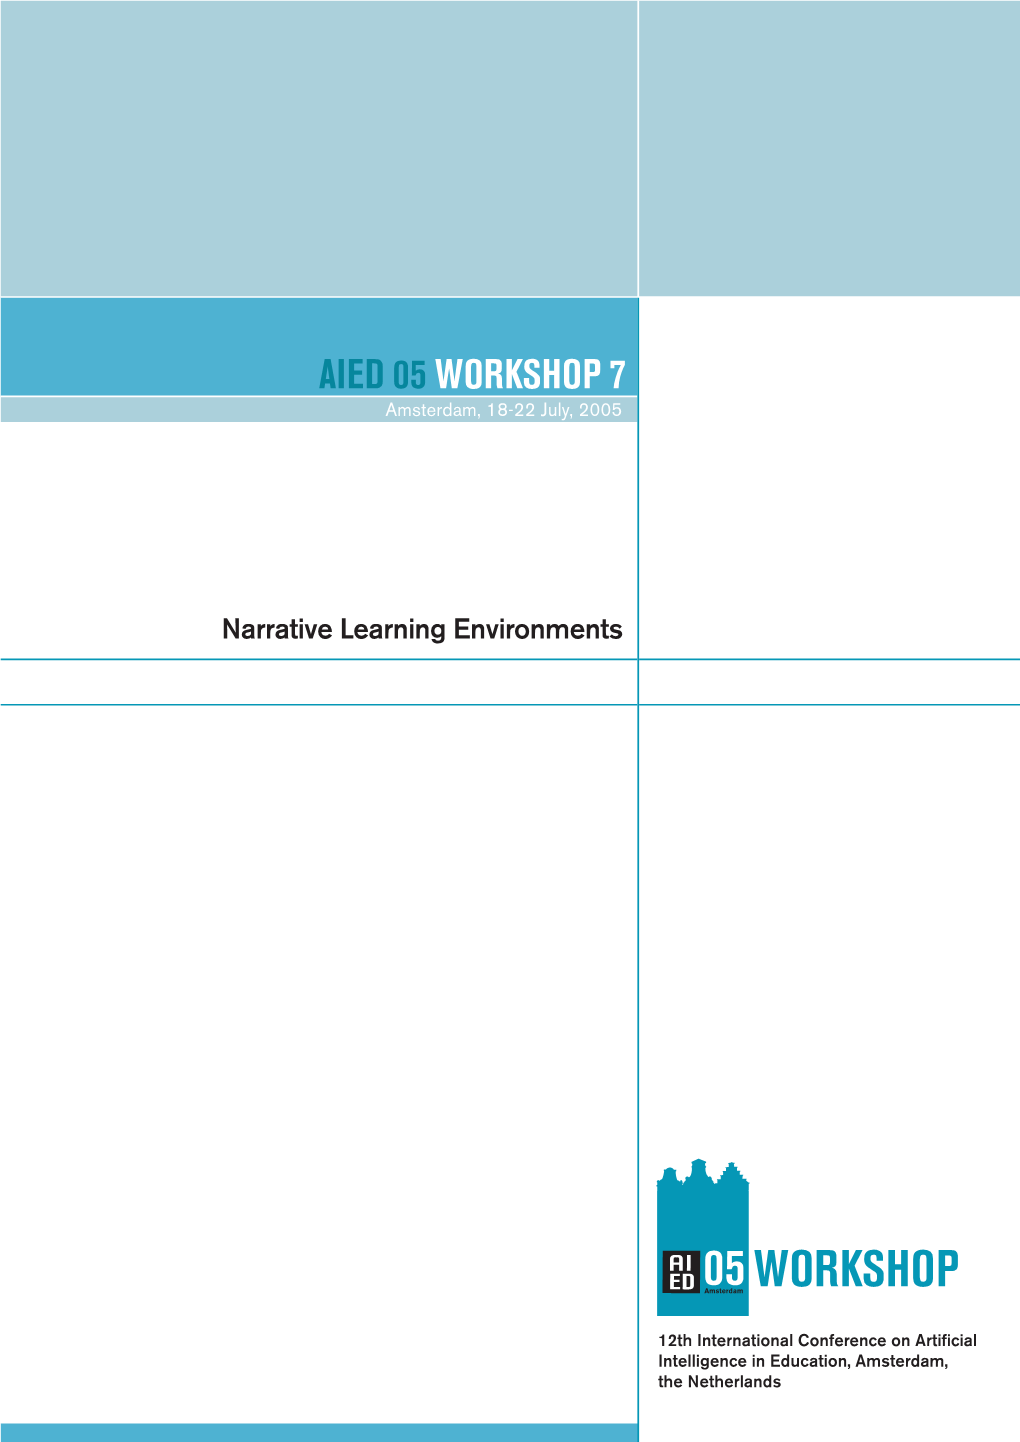 Narrative Learning Environments (NLE)